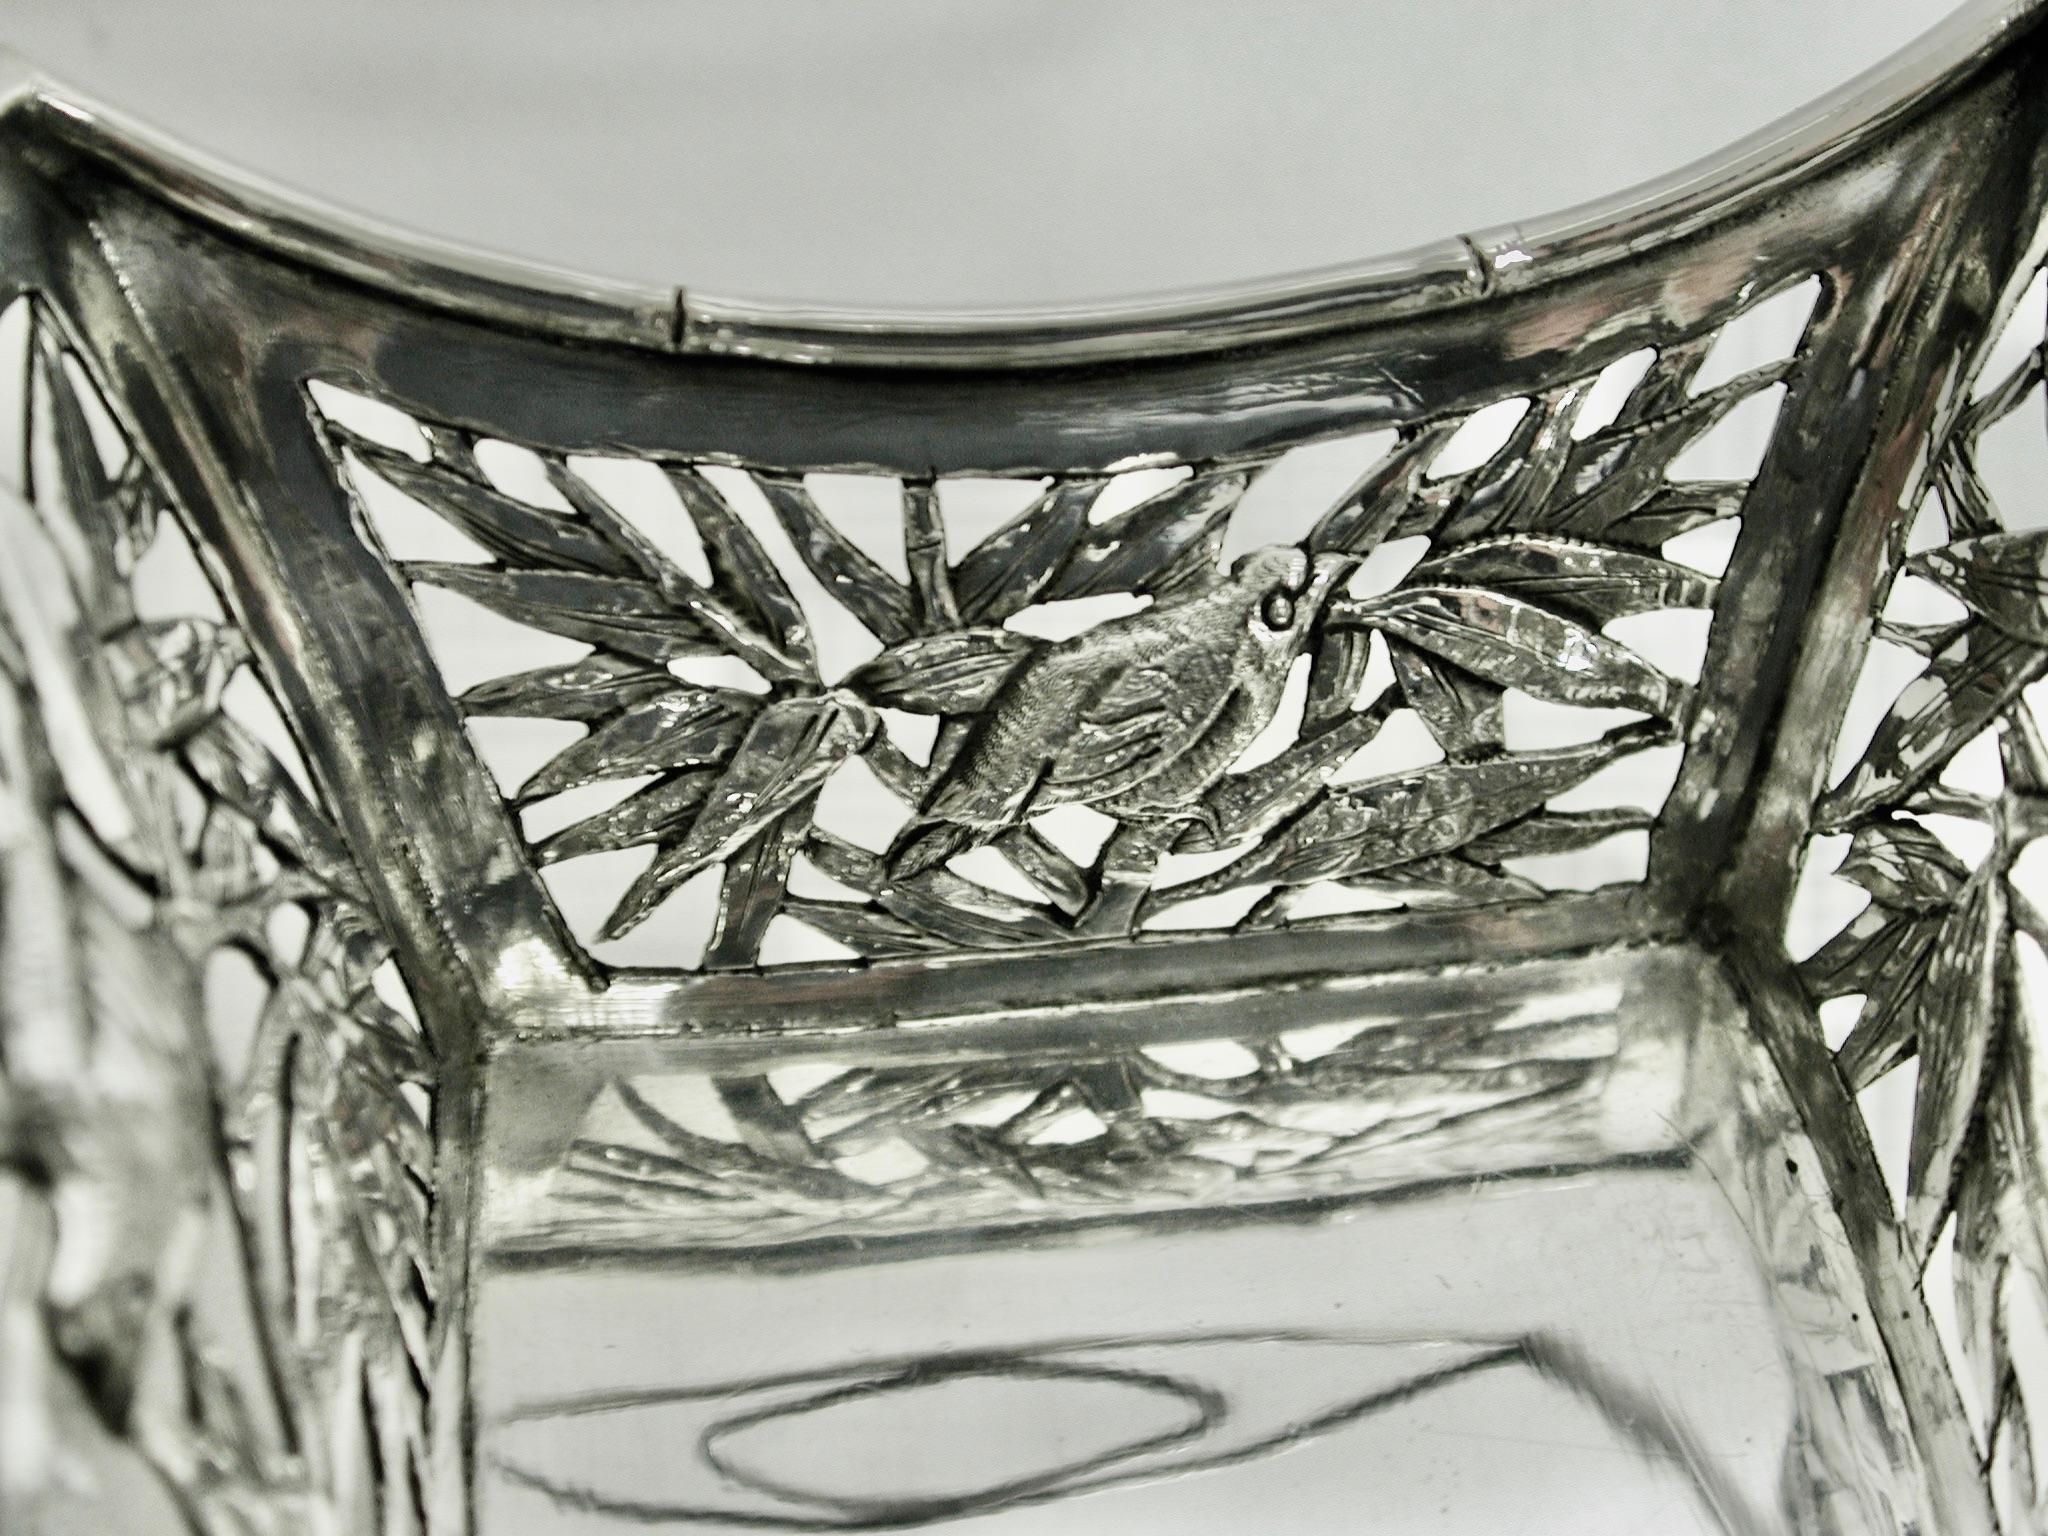 Chinese Export Chinese Silver Sweet Basket with Swing Handle, Tuck Chang, Shanghai, Circa 1900